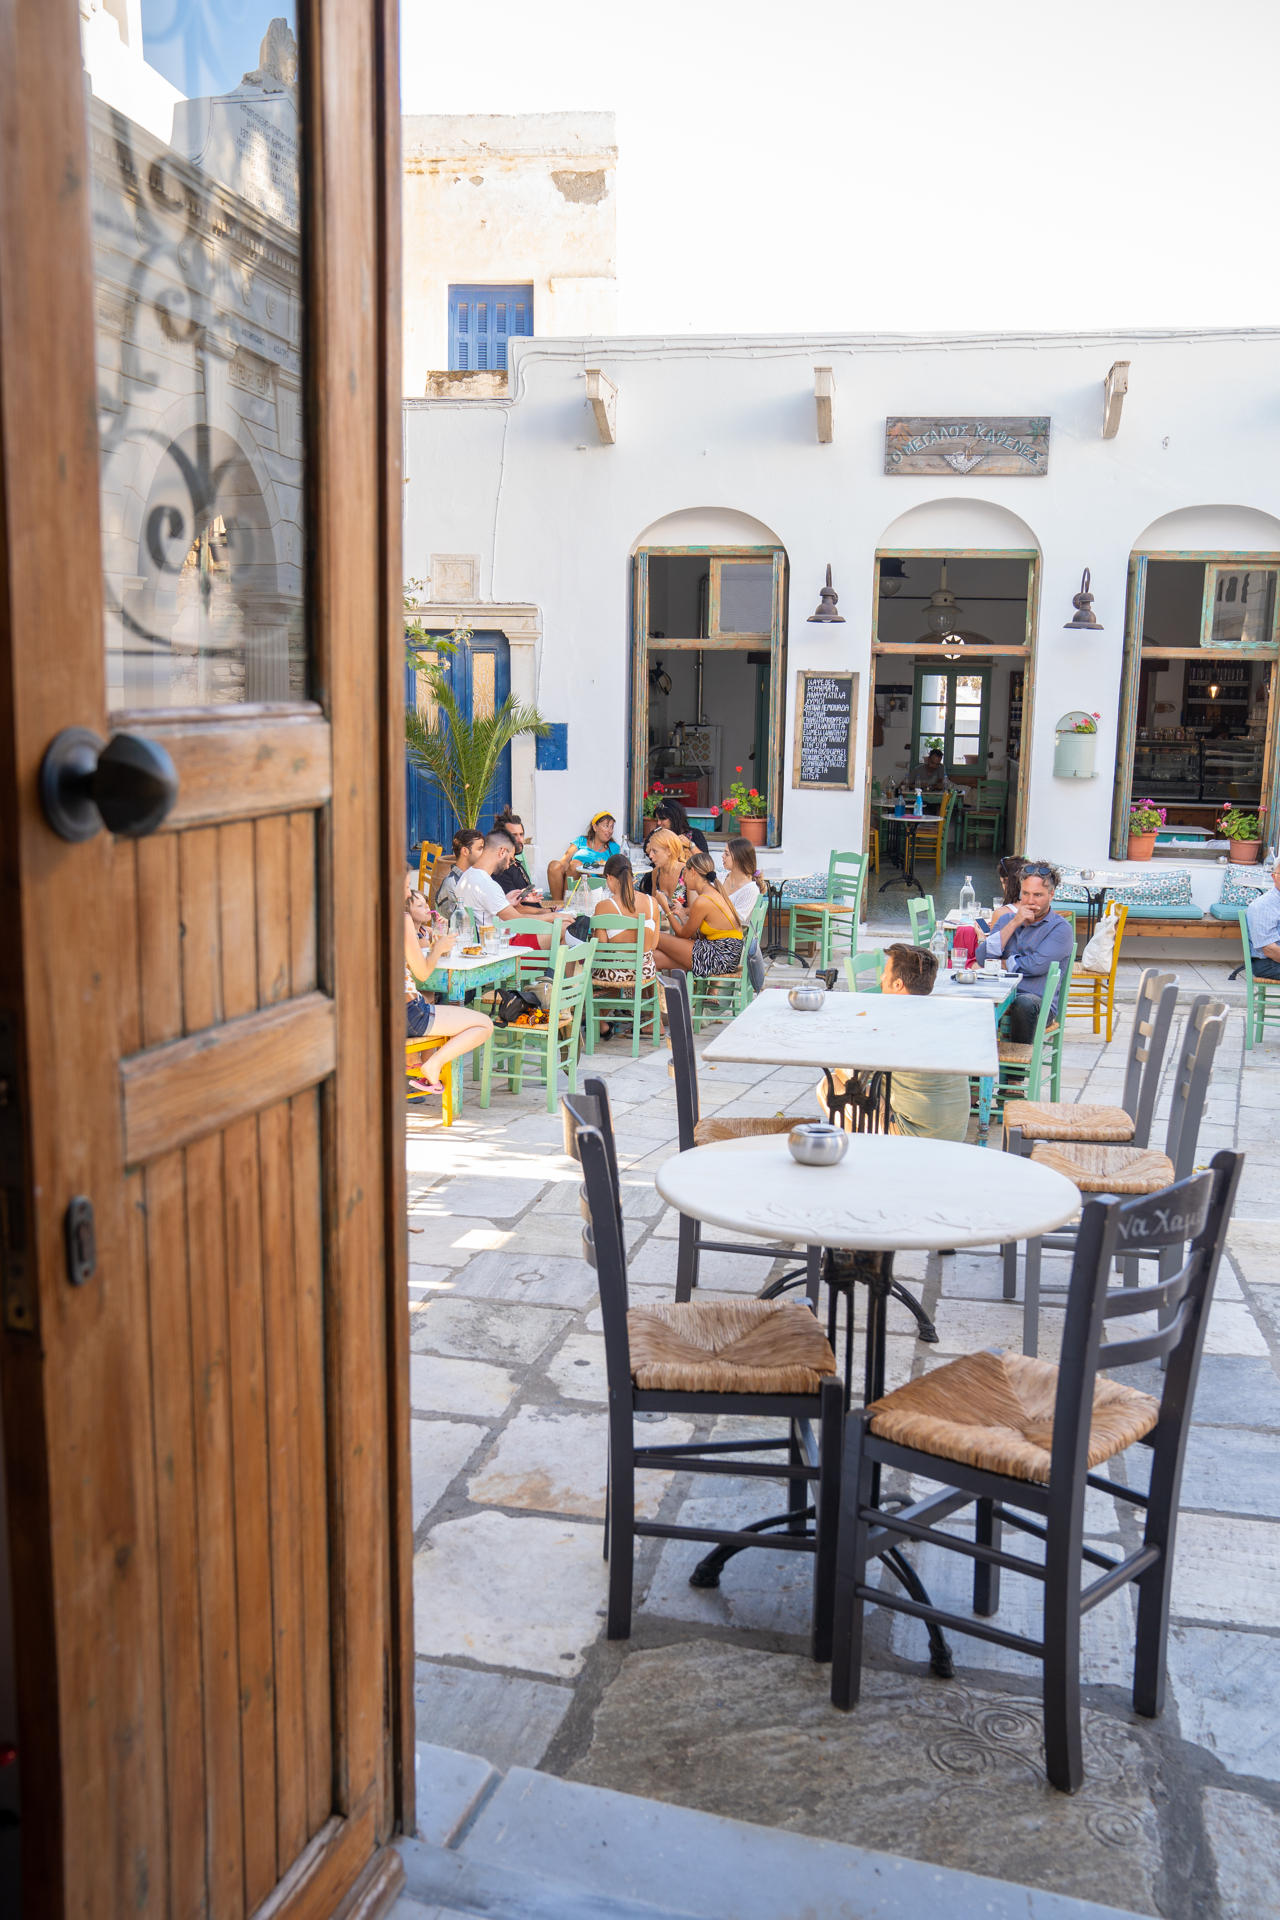 Pyrgos (also known as Panormos), in the north, has a charming square where you can settle down to Greek coffee and a slice of galaktoboureko